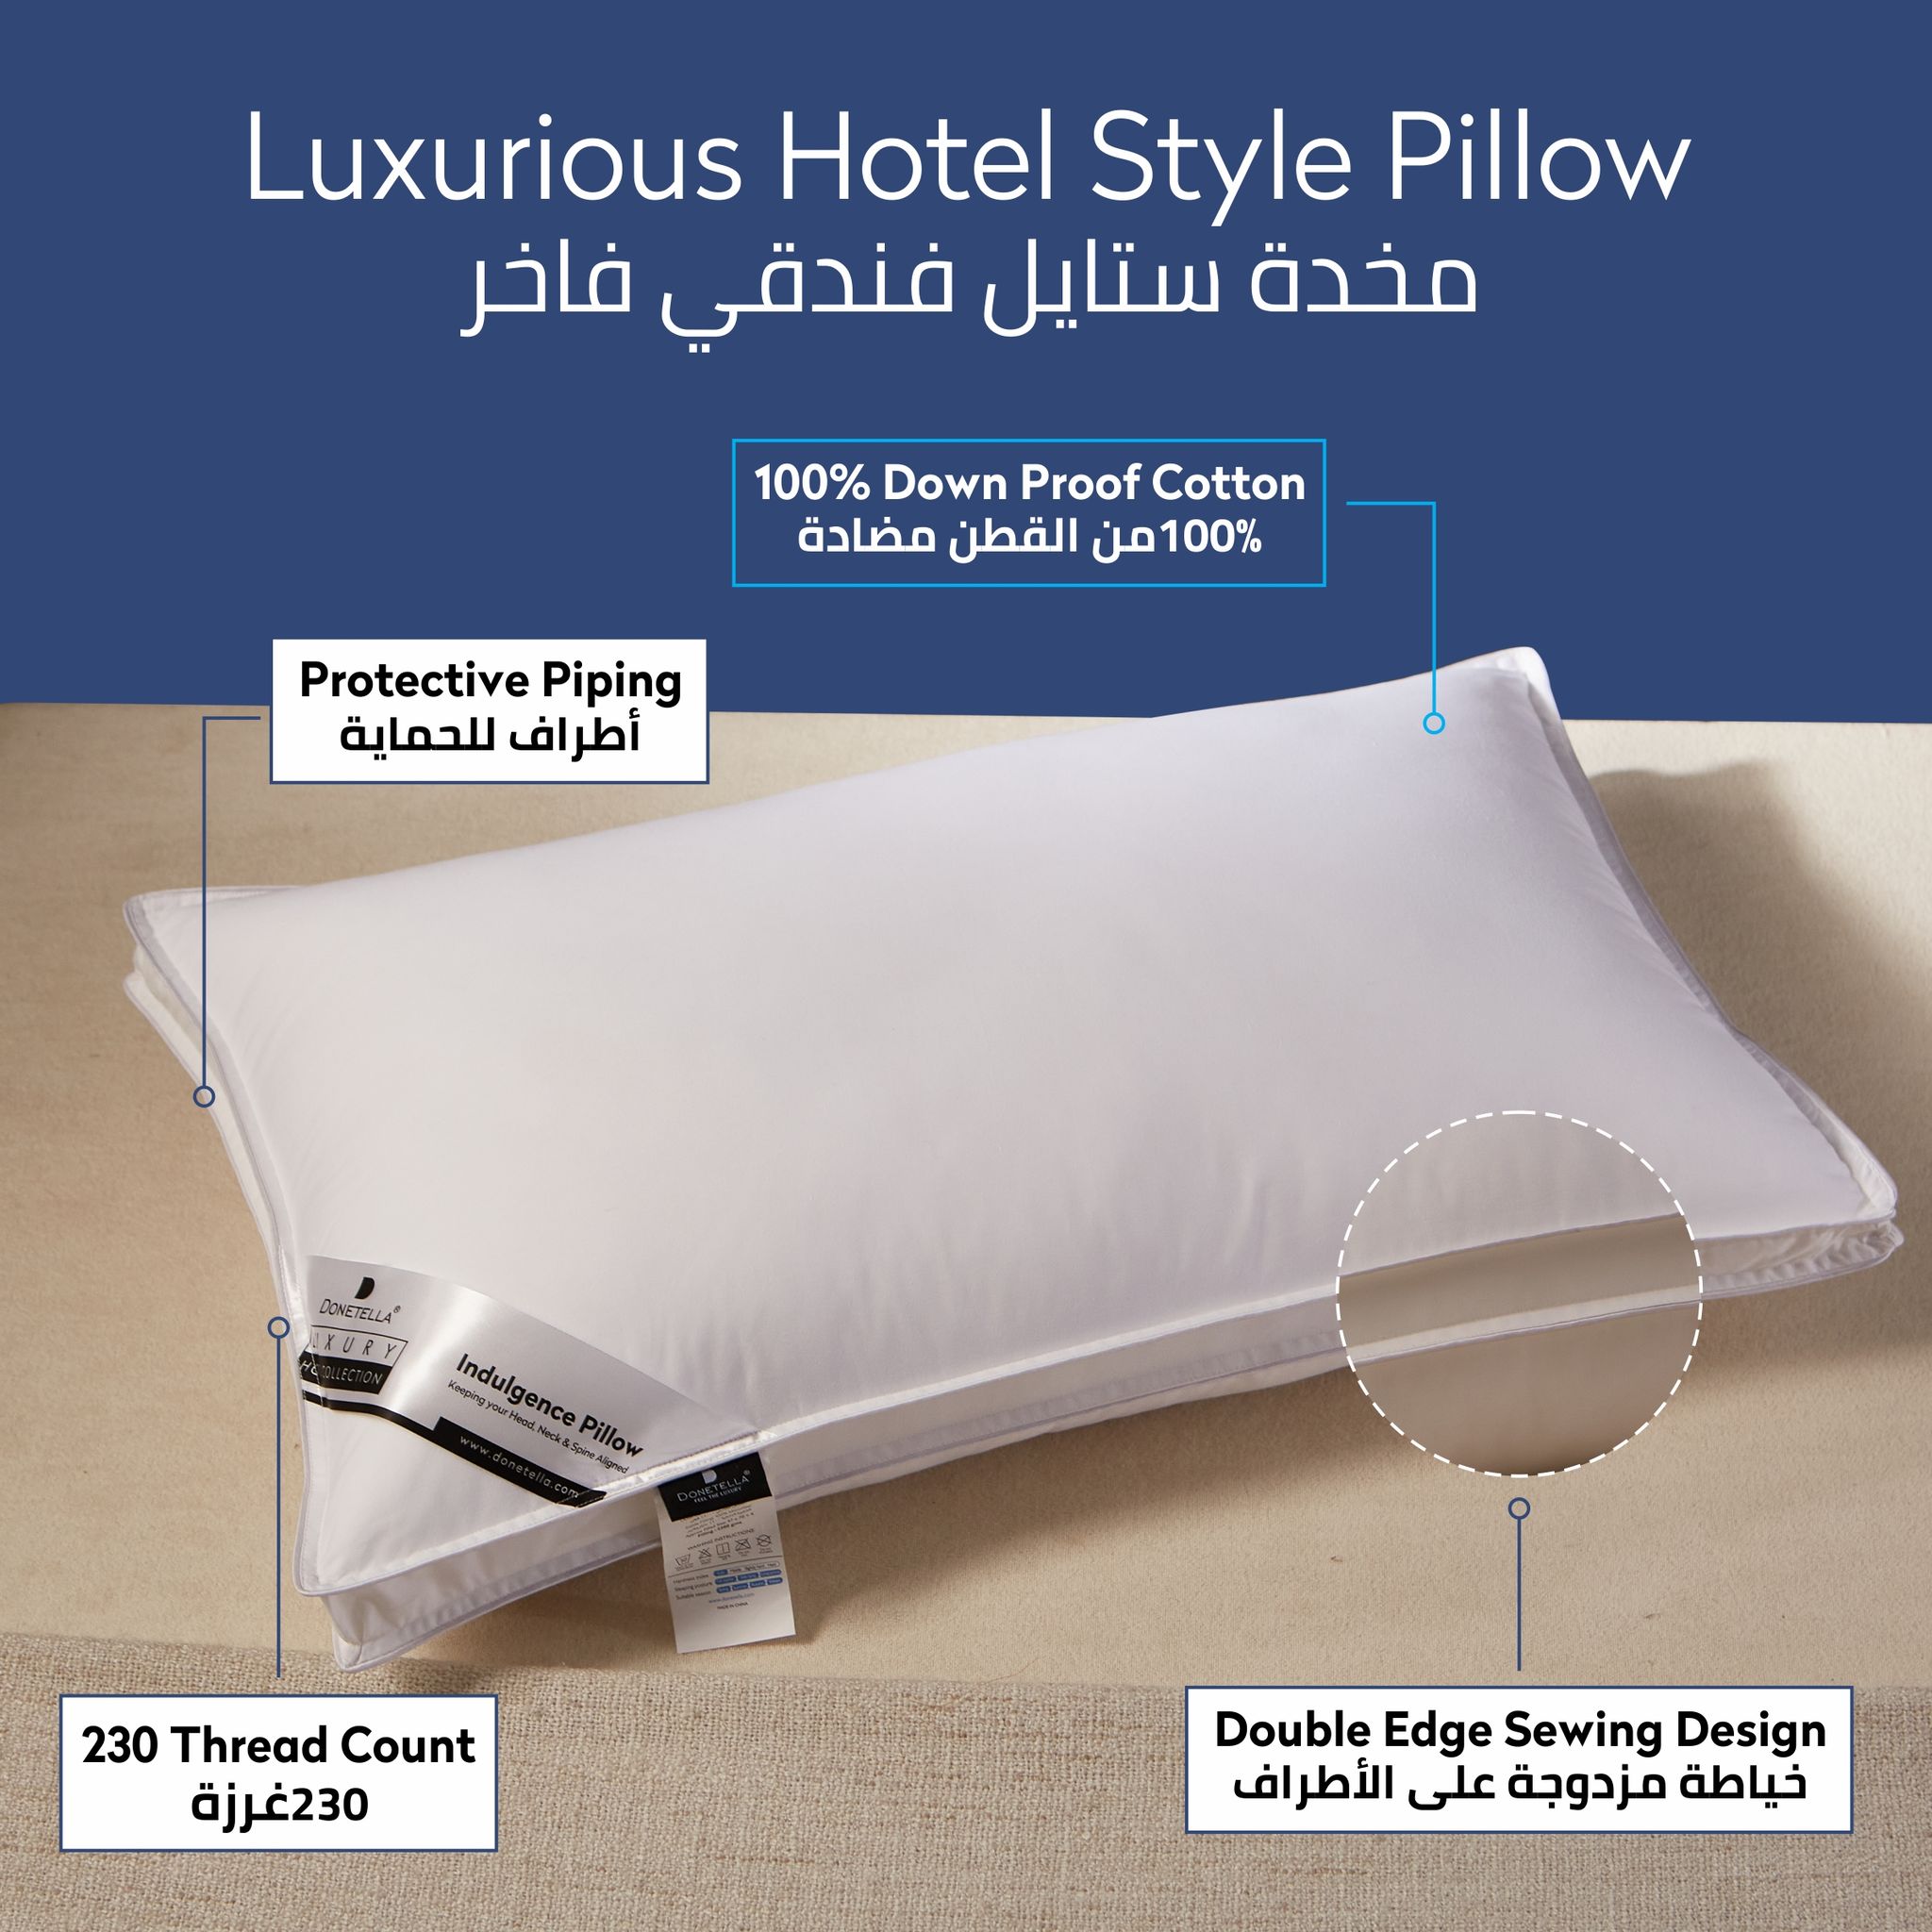 Hotel Style Bed Pillows: 2.2 Kg Soft Breathable Cotton Cover Top With Luxury Down Alternative Filling Pillow